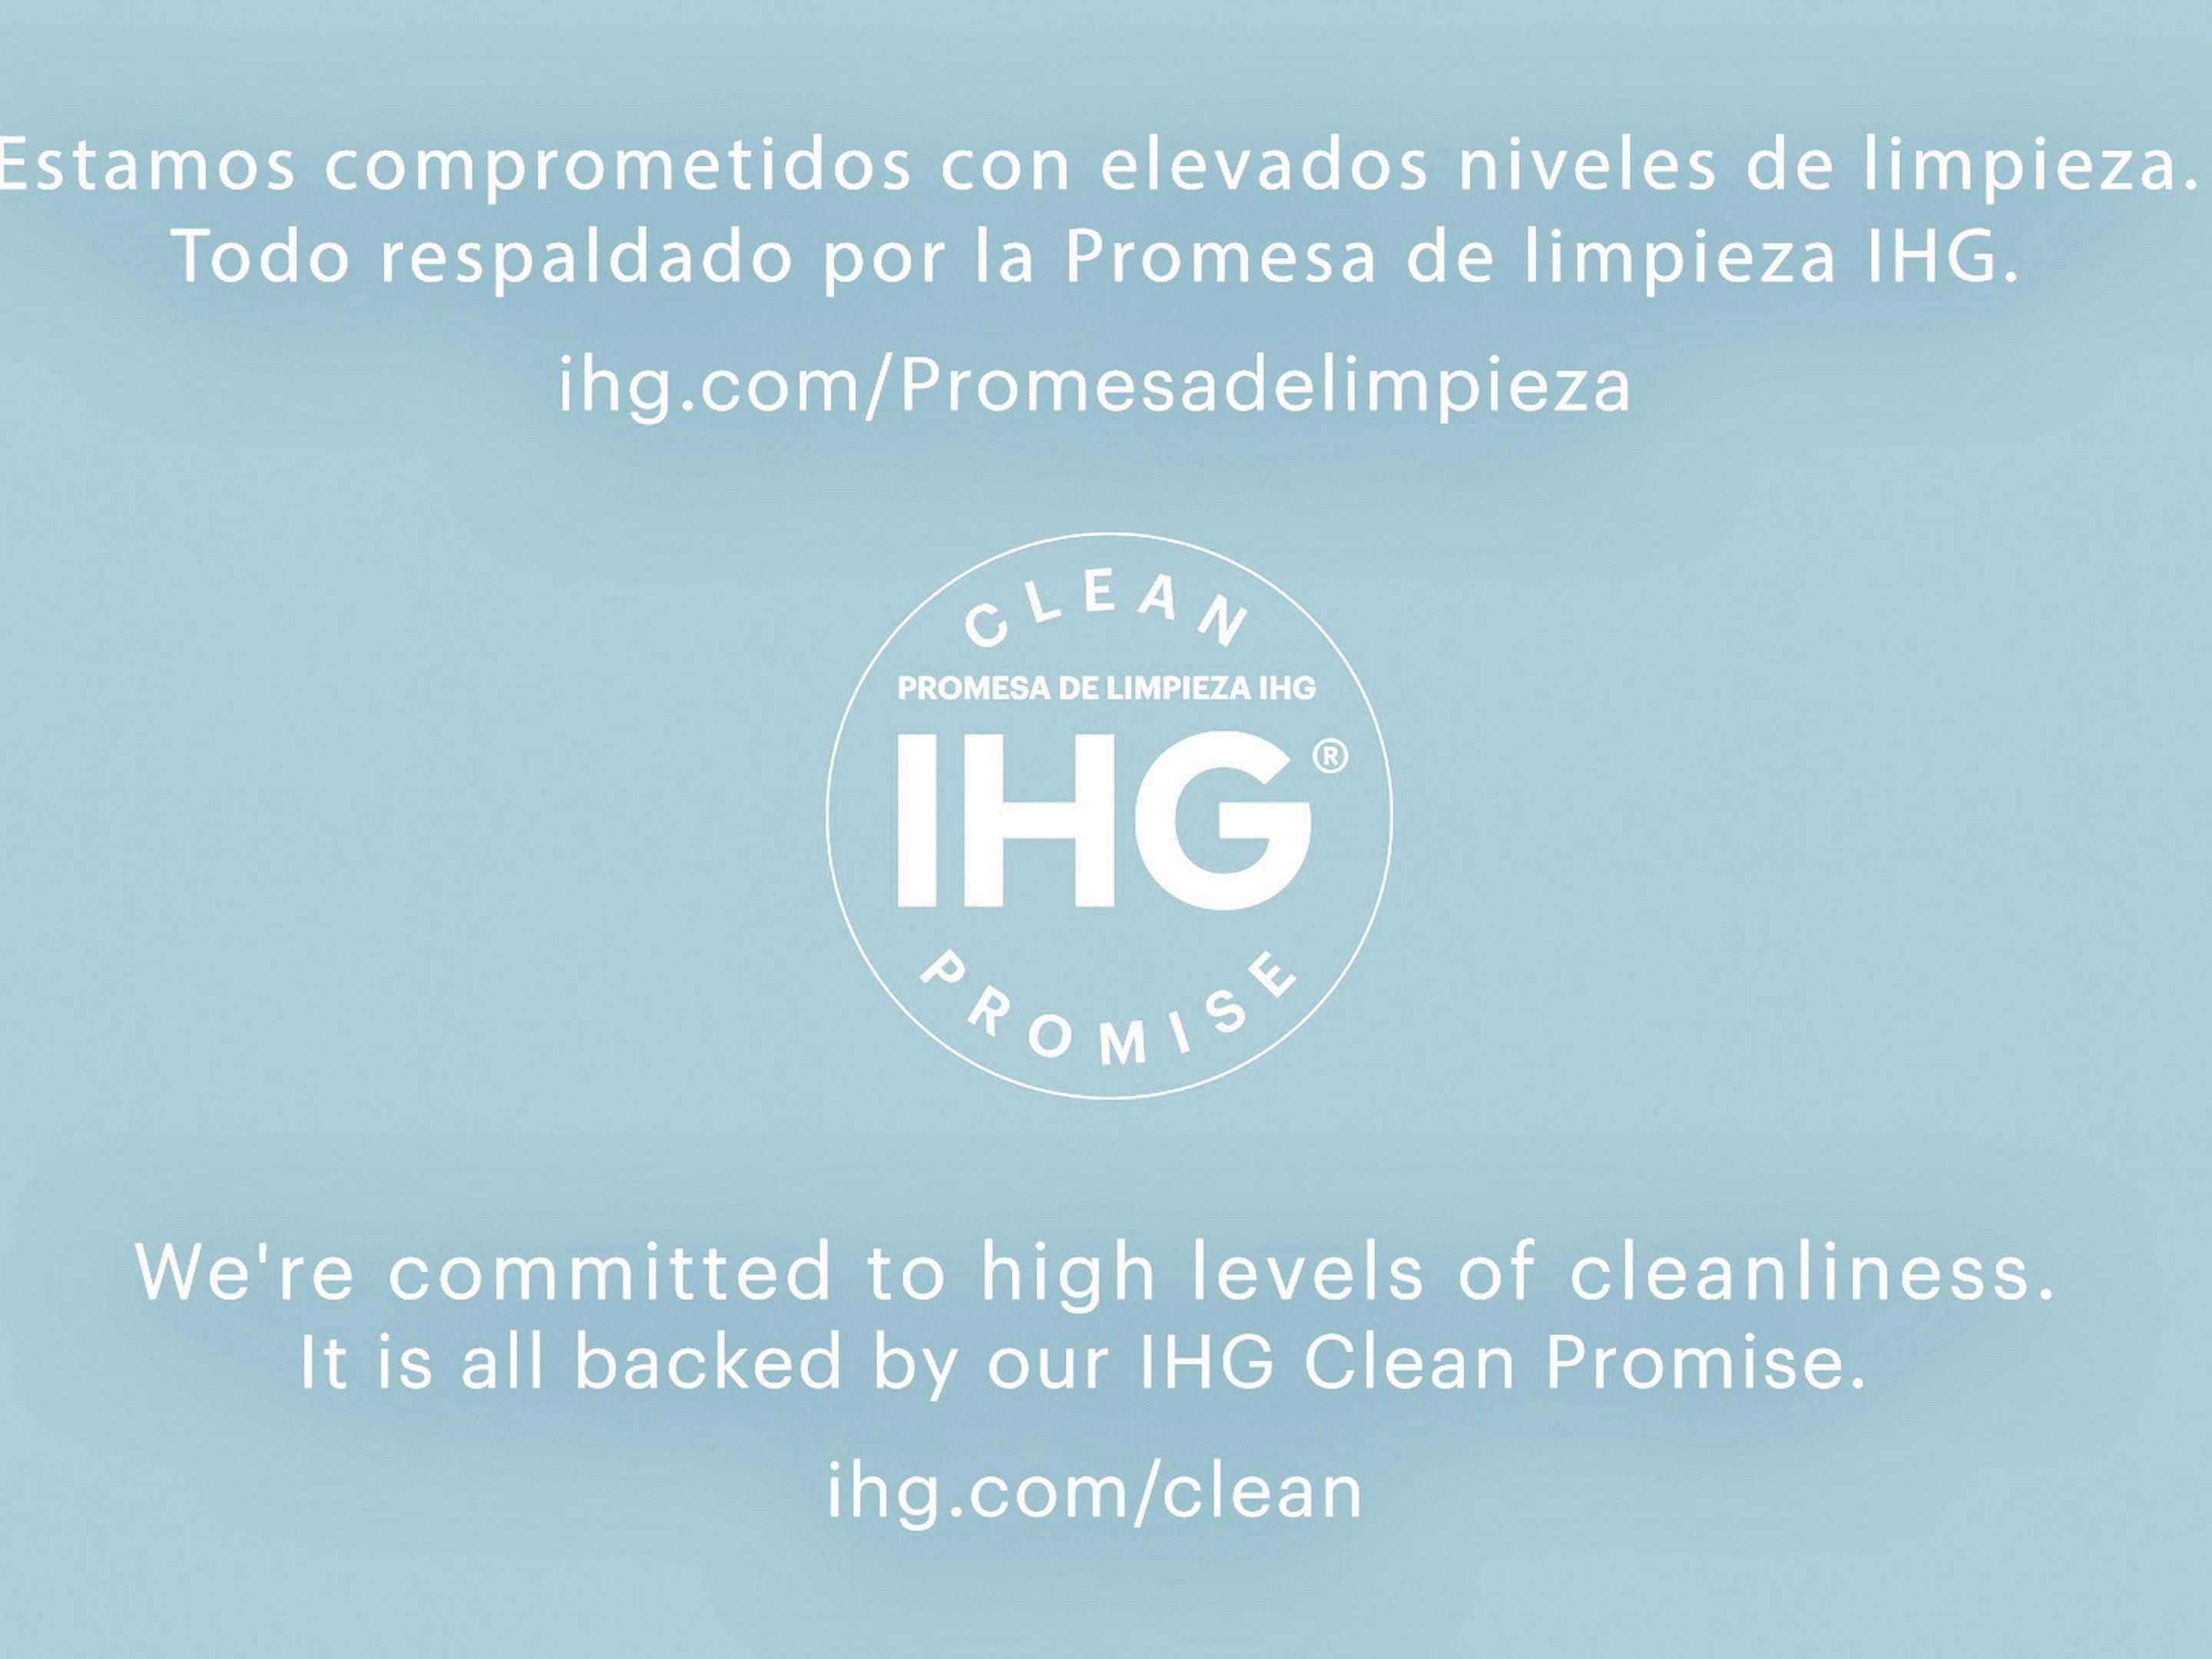 We are committed to high levels of cleanliness. It is all backed up by our IHG Clean Promise.